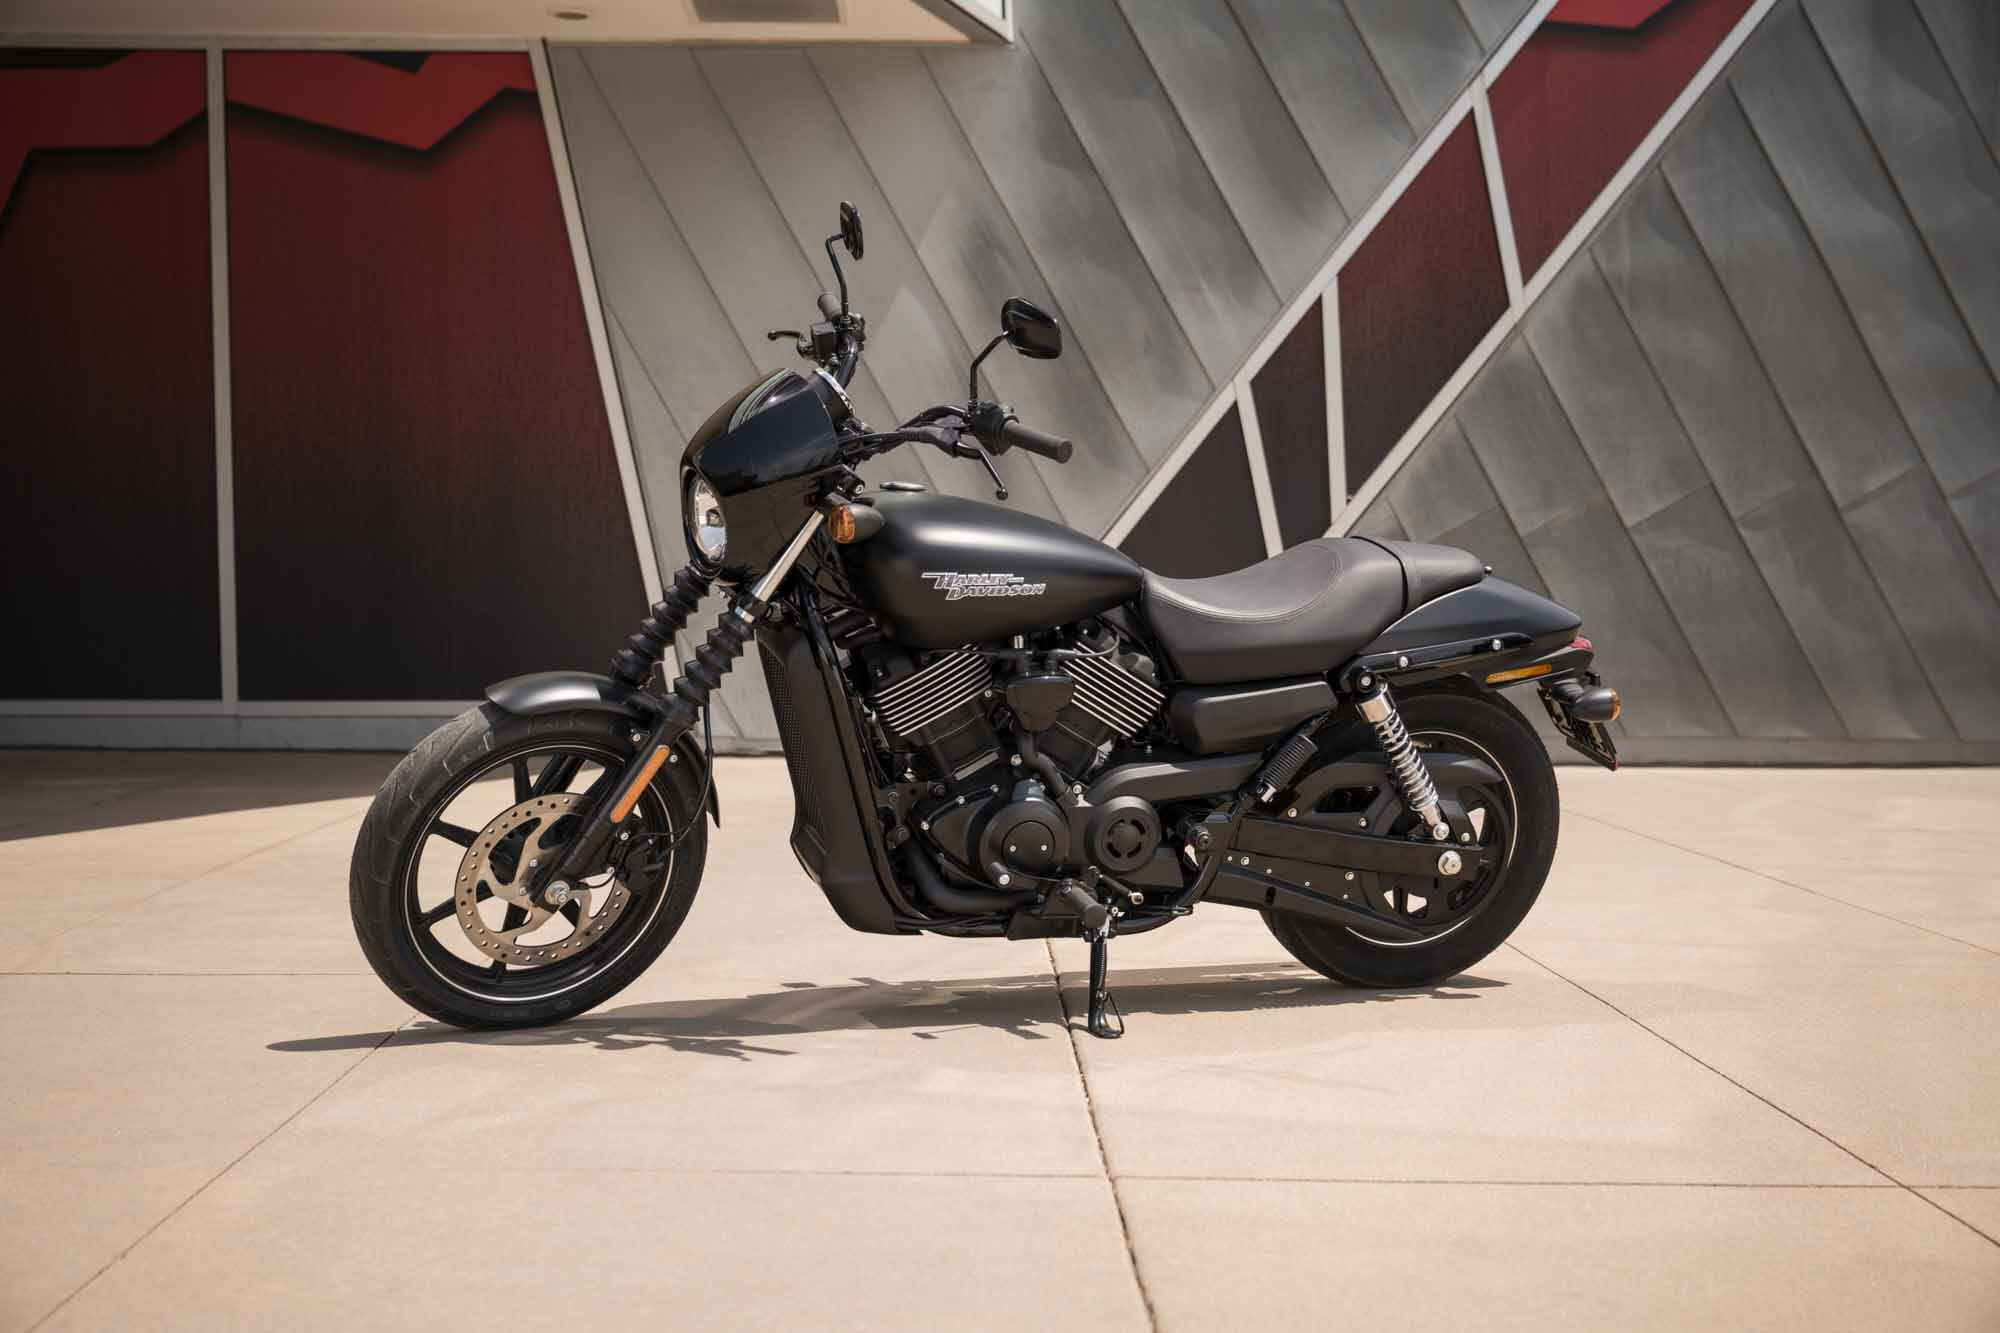 Harley-Davidson wants to close plant in India?
- also in the App MOTORCYCLE NEWS